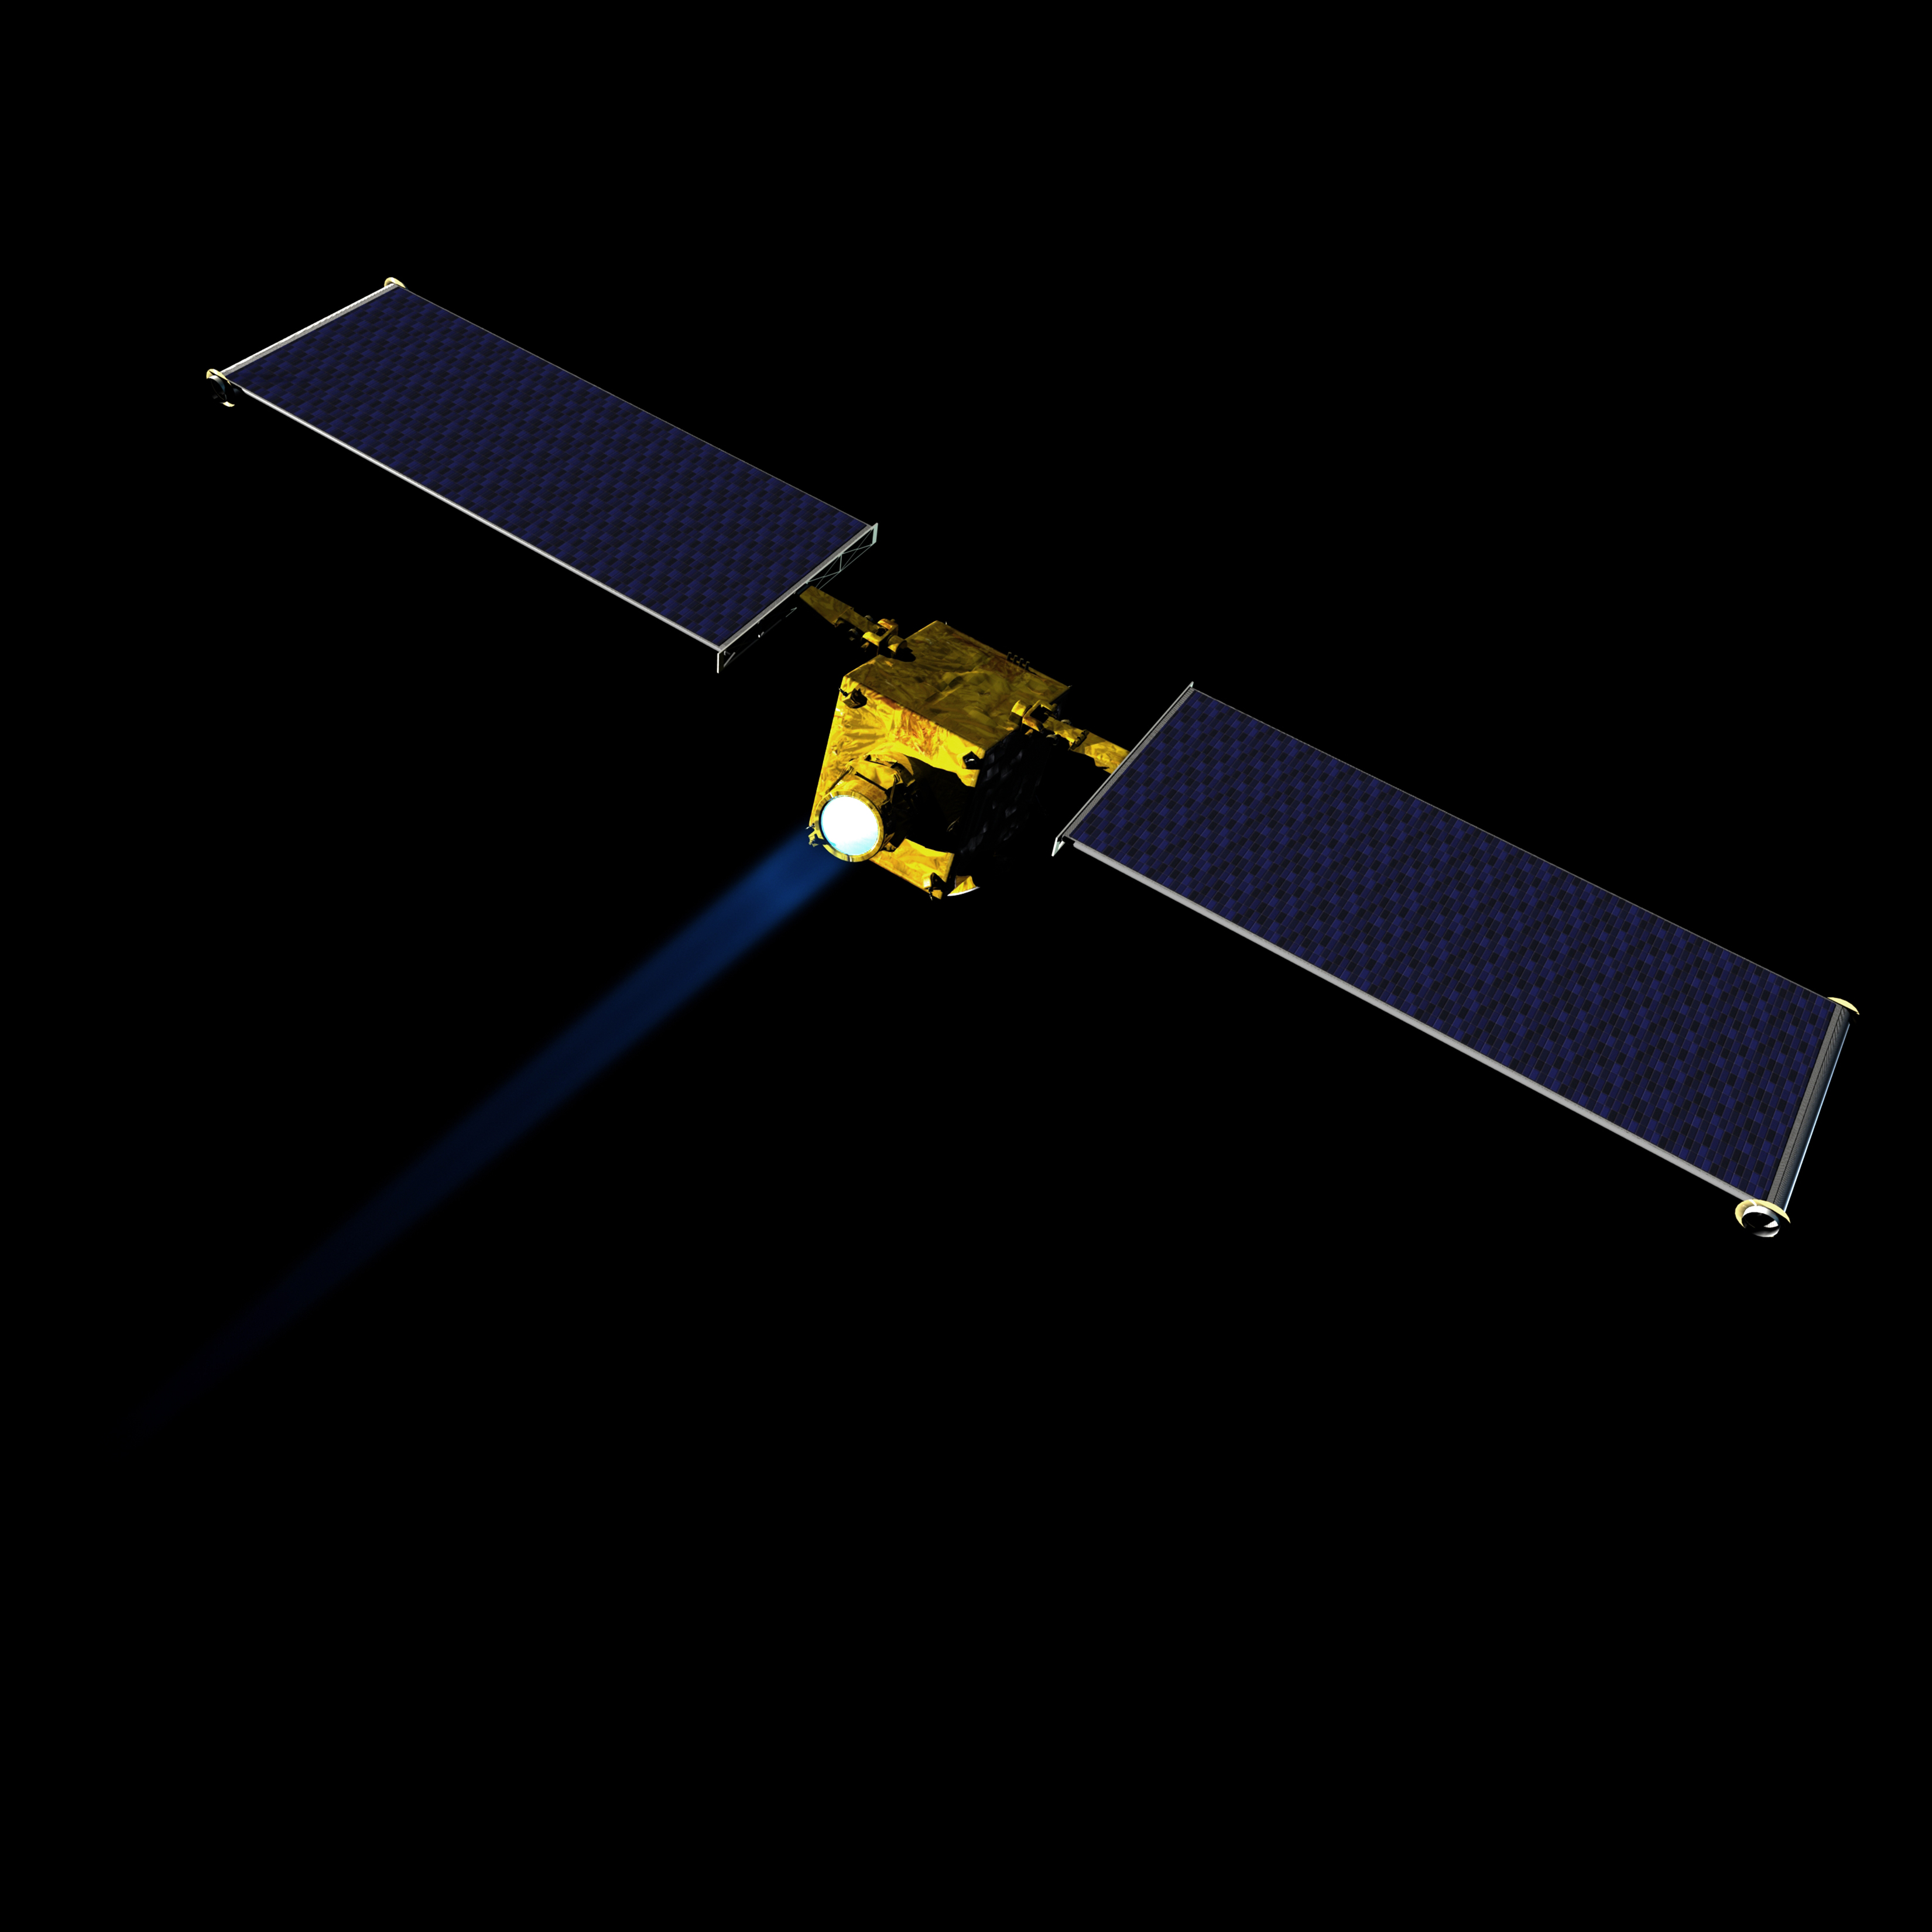 Artist concept of NASA's Double Asteroid Redirection Test (DART)